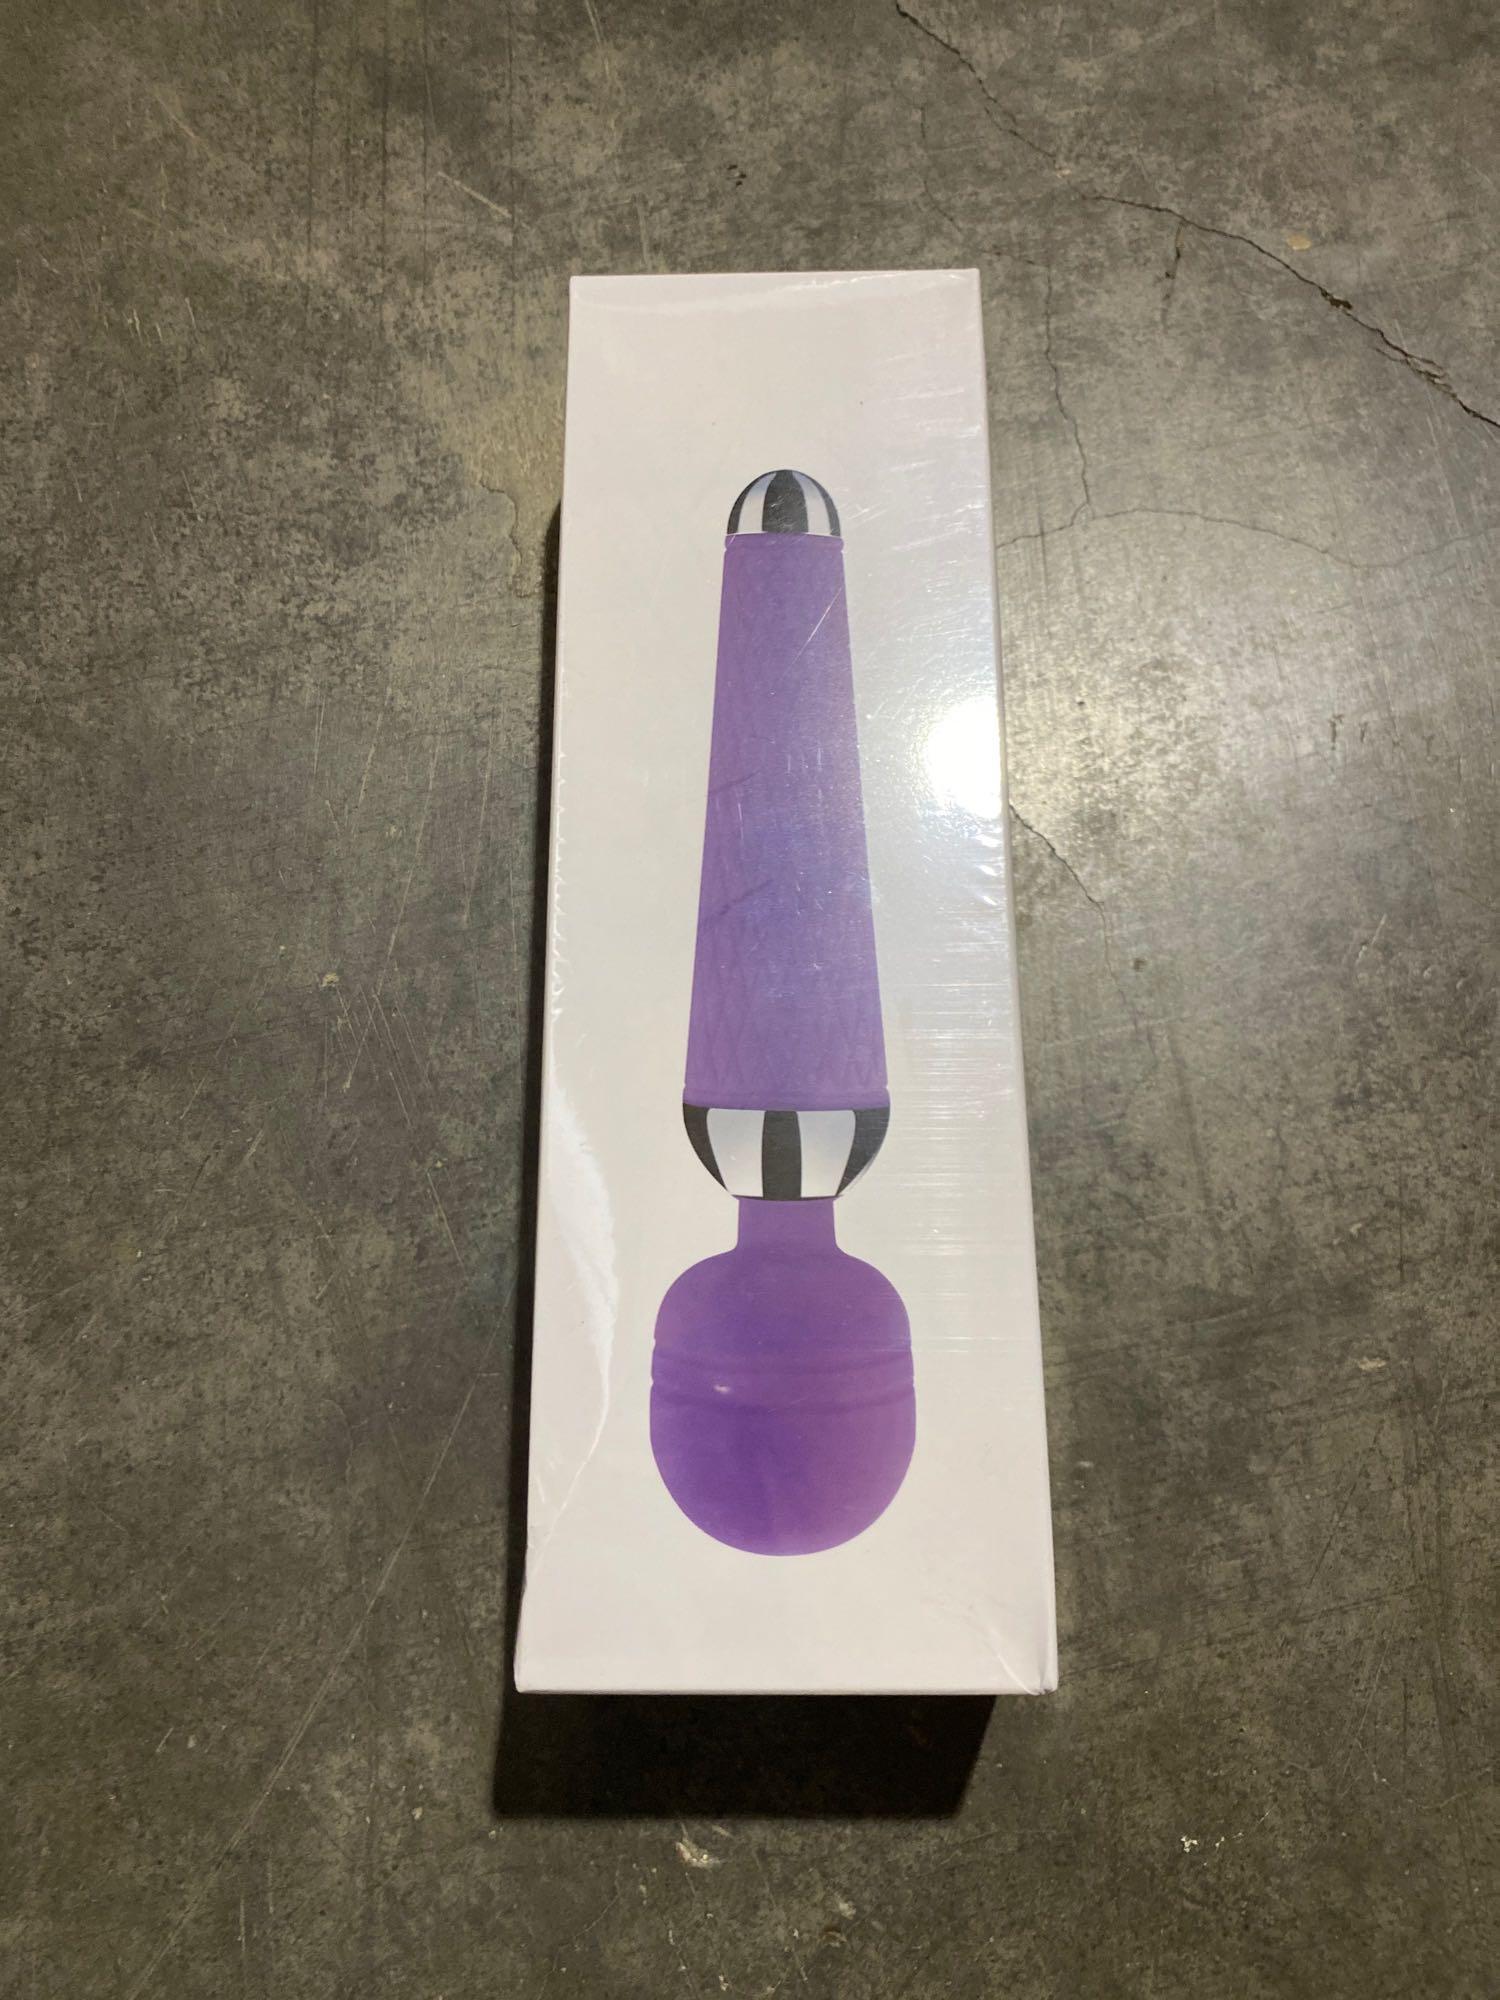 Magic Wand Multi-Frequency Vibrator - BRAND NEW, $69.99 MSRP